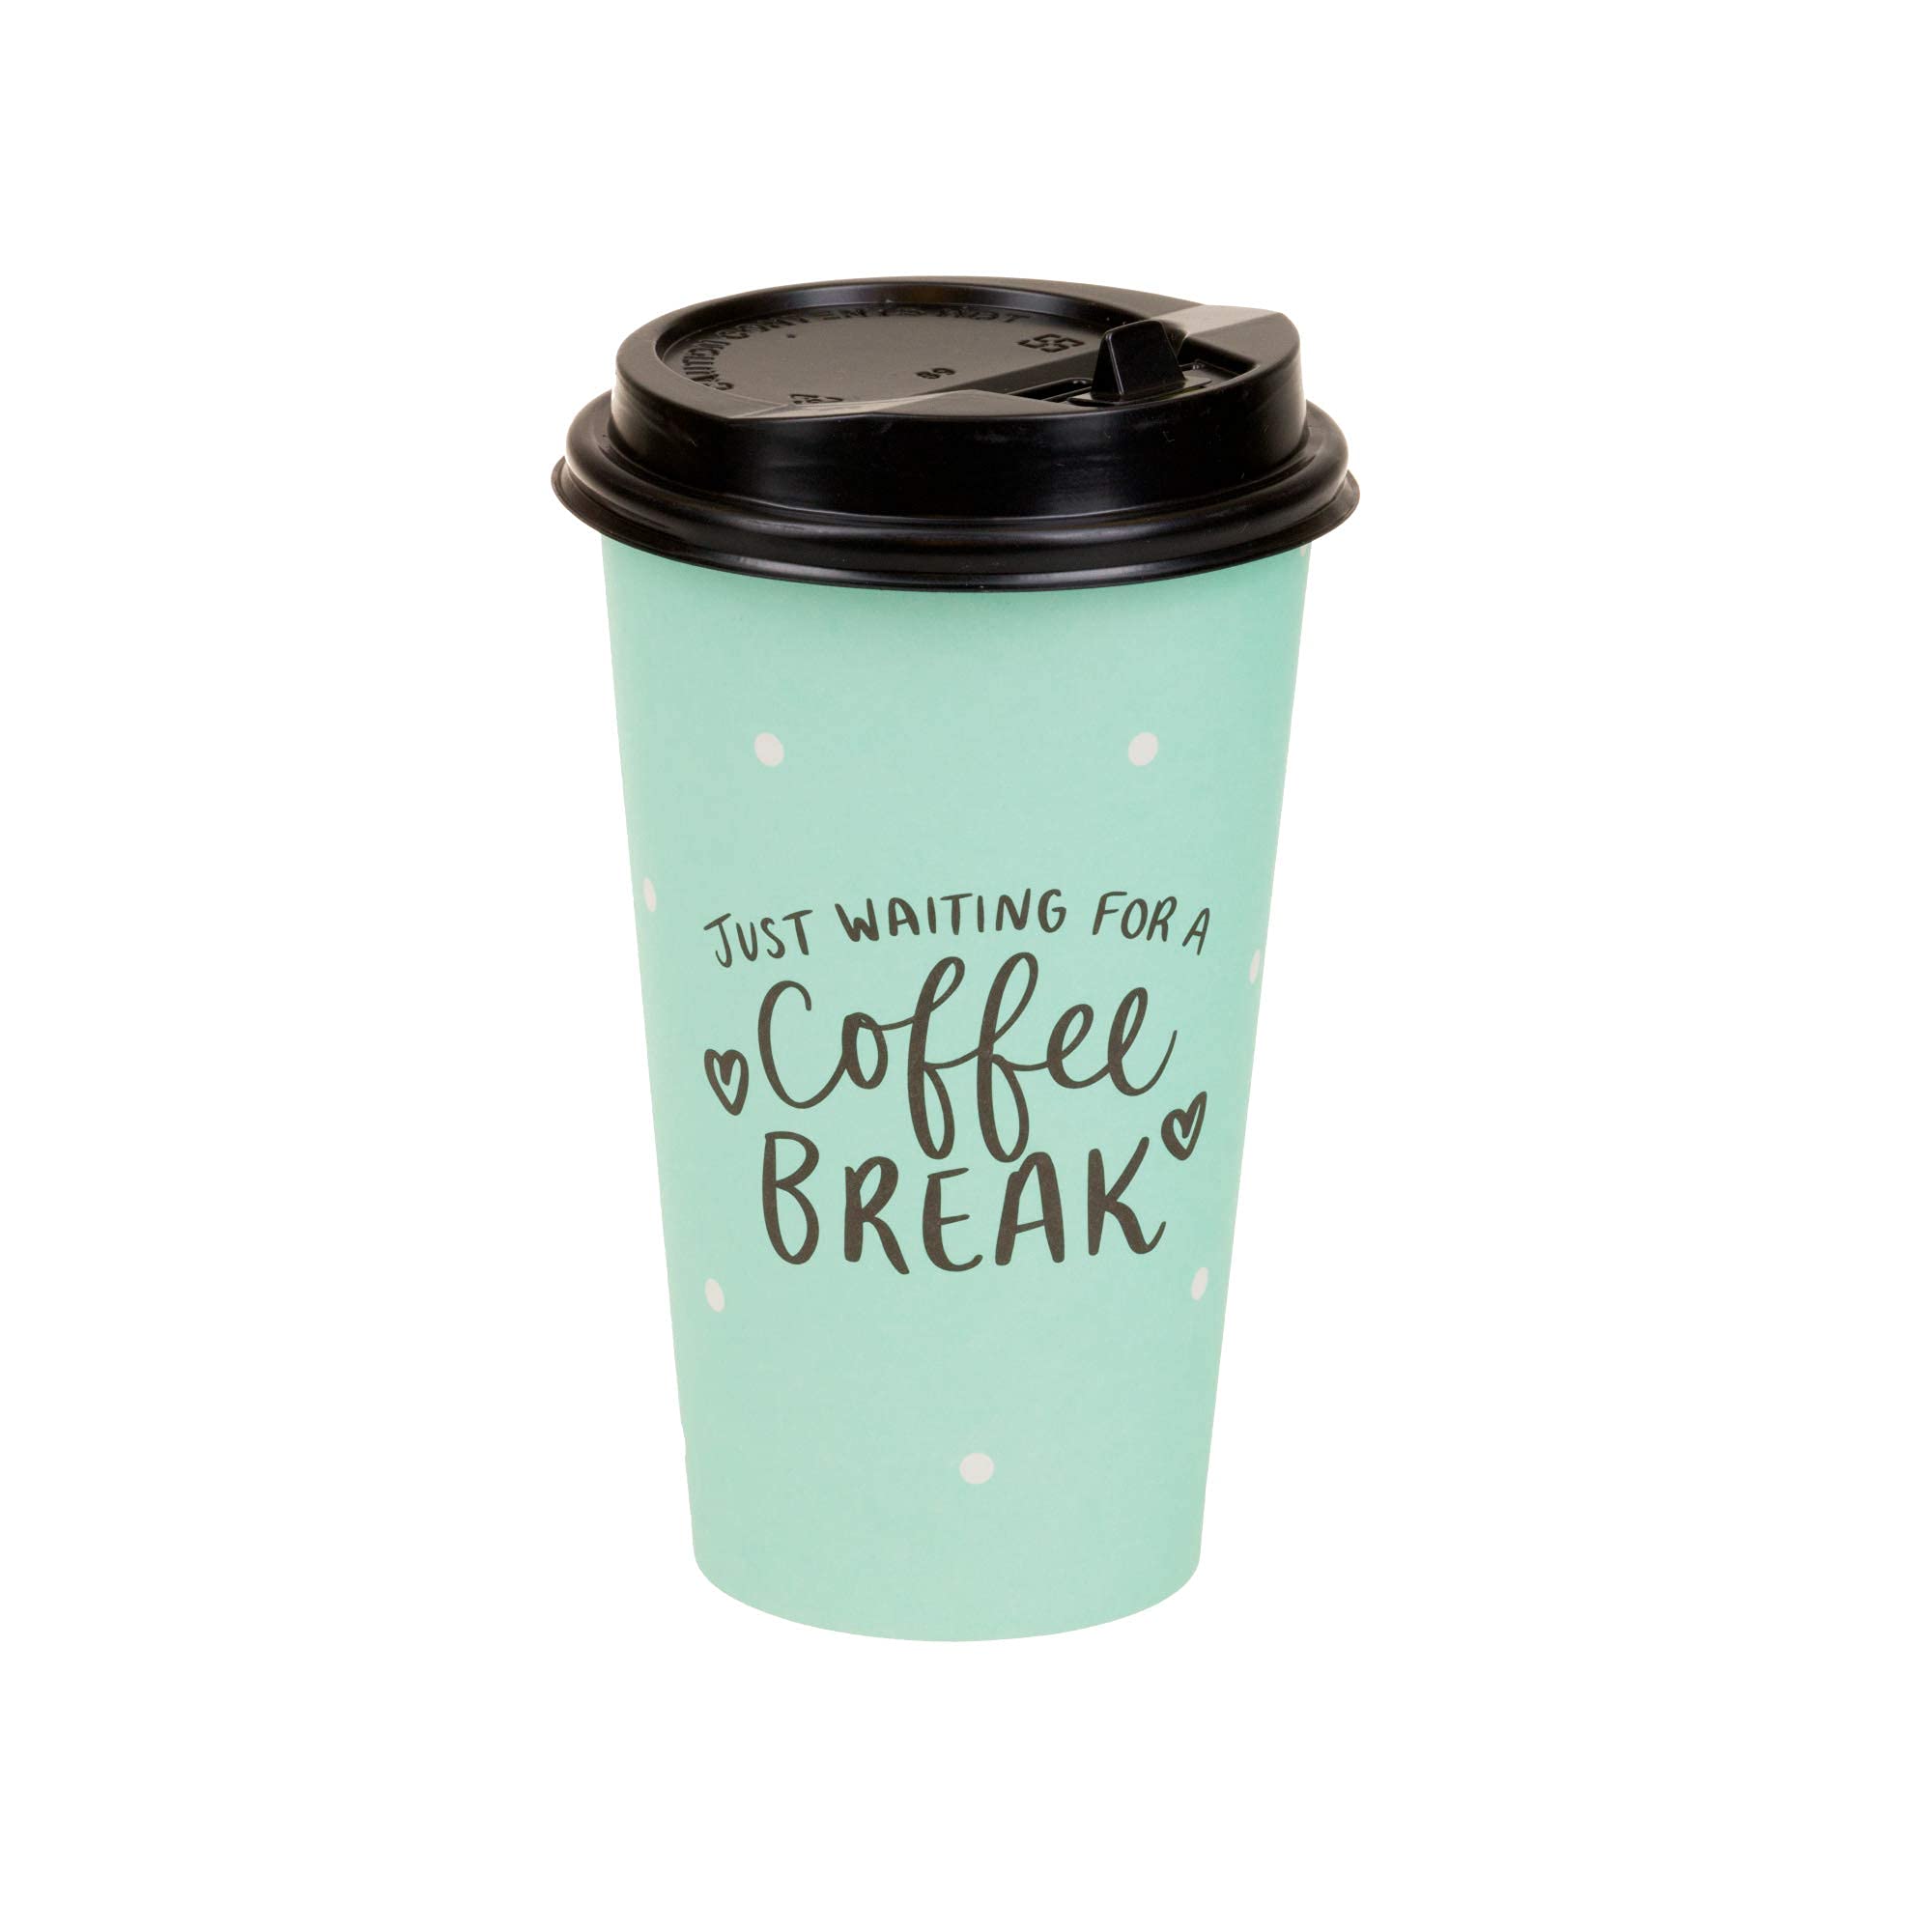 Coffee Break 16 oz Coffee Cups with Lids and Sleeves